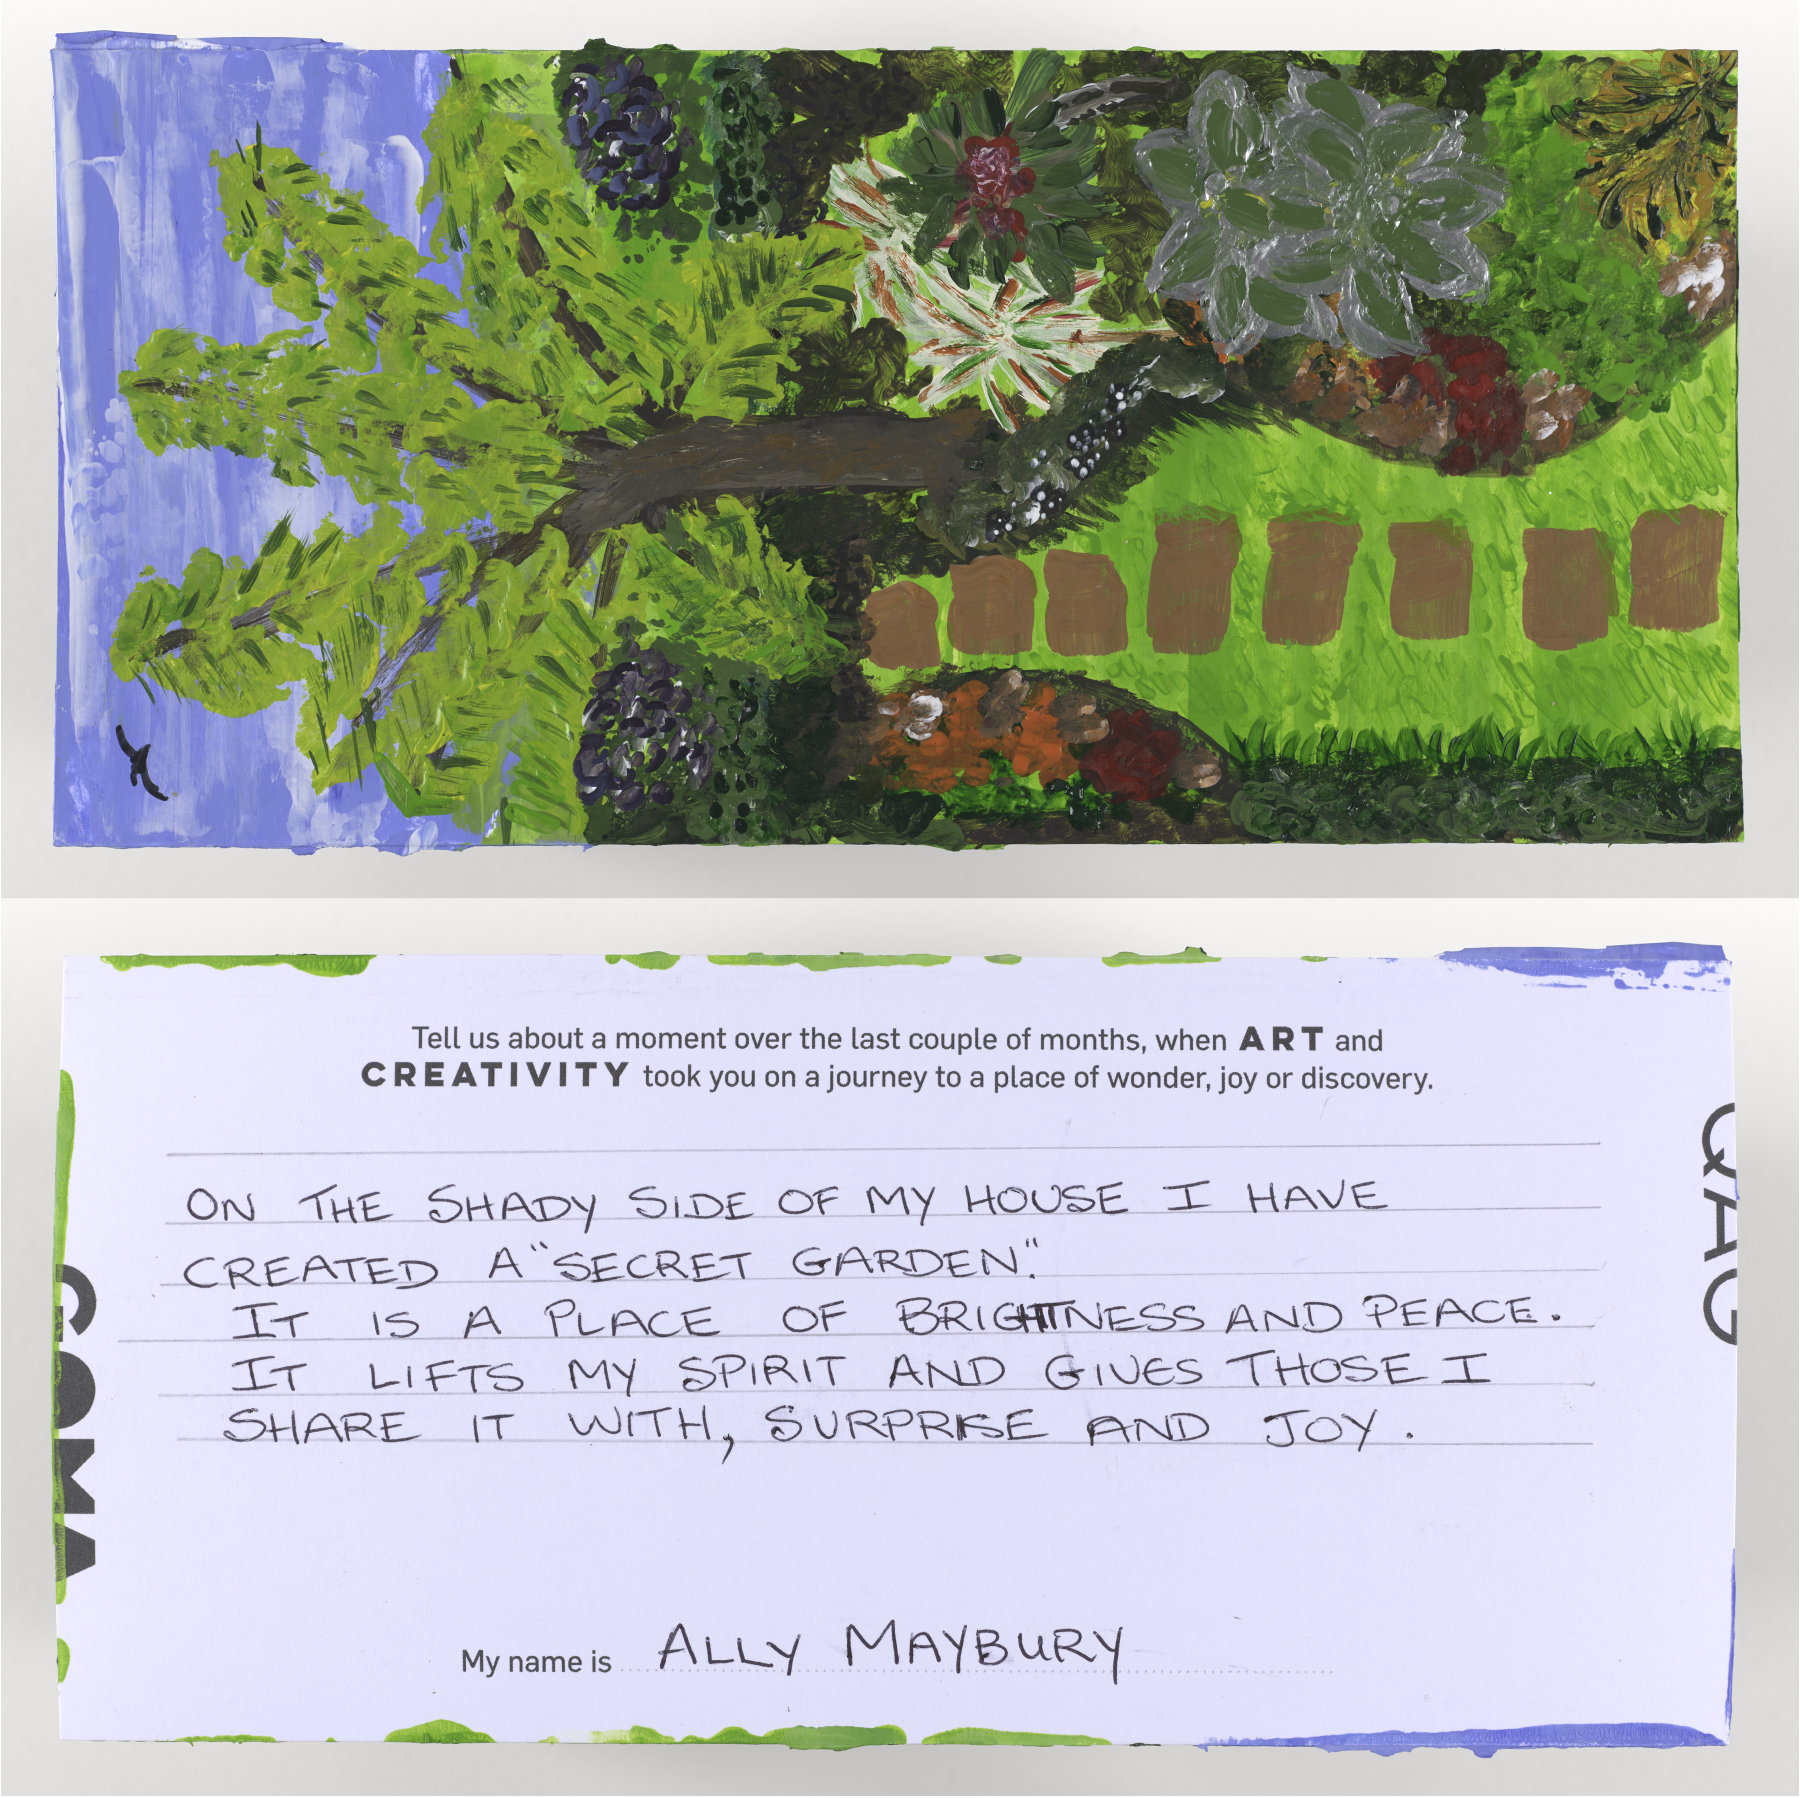 Generated image of the artwork: Ally Maybury